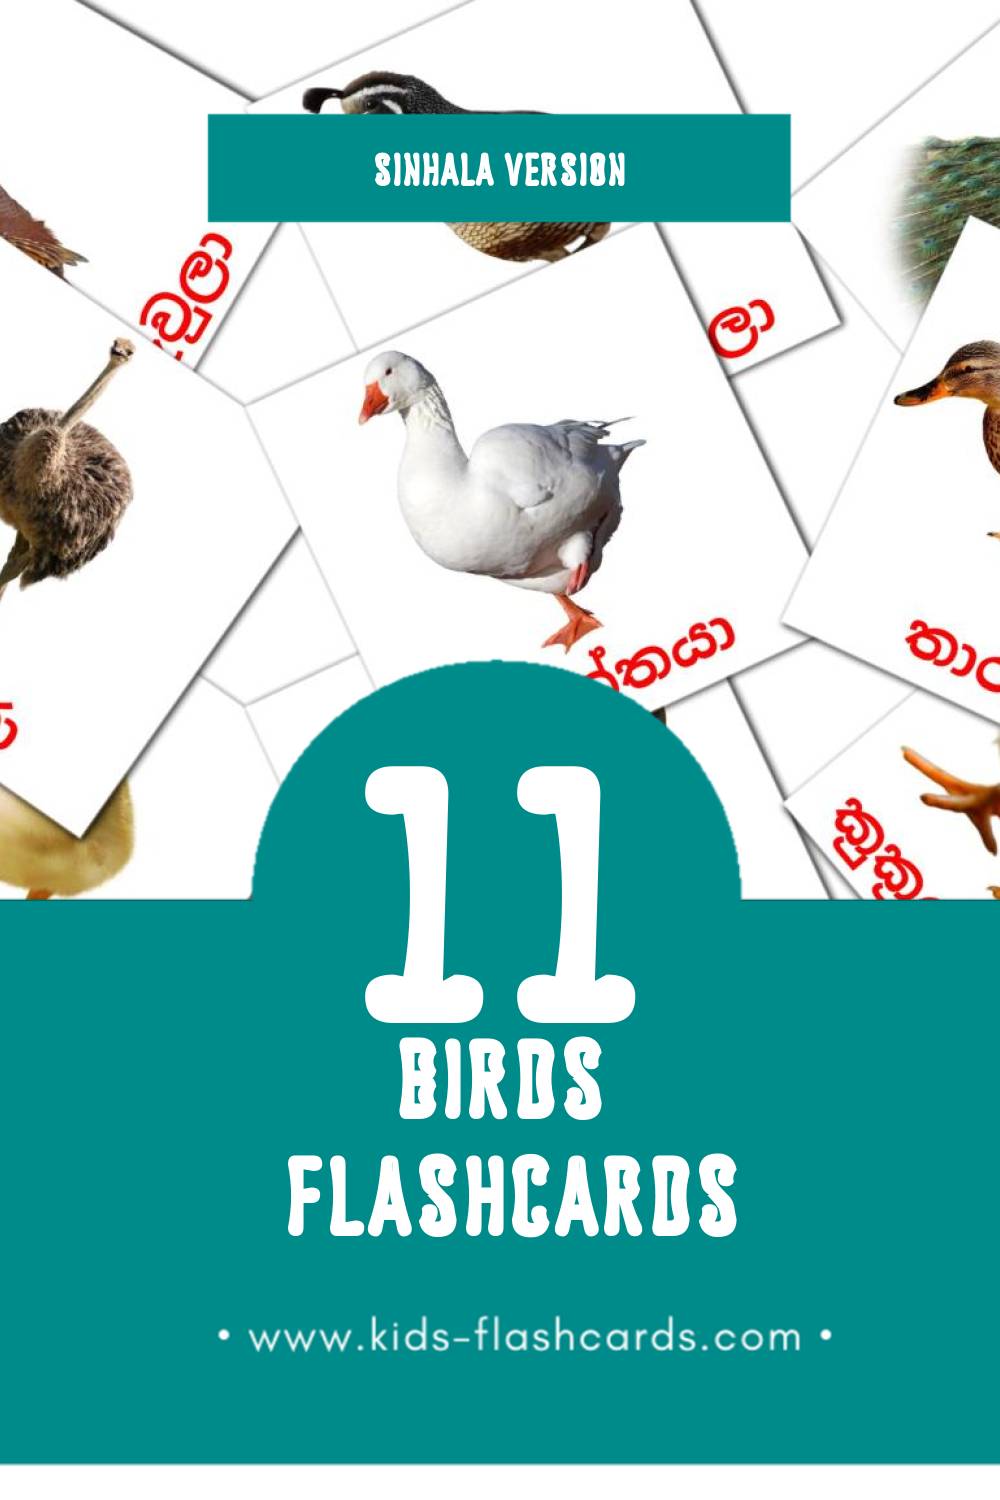 Visual කුරුල්ලන් Flashcards for Toddlers (11 cards in Sinhala)